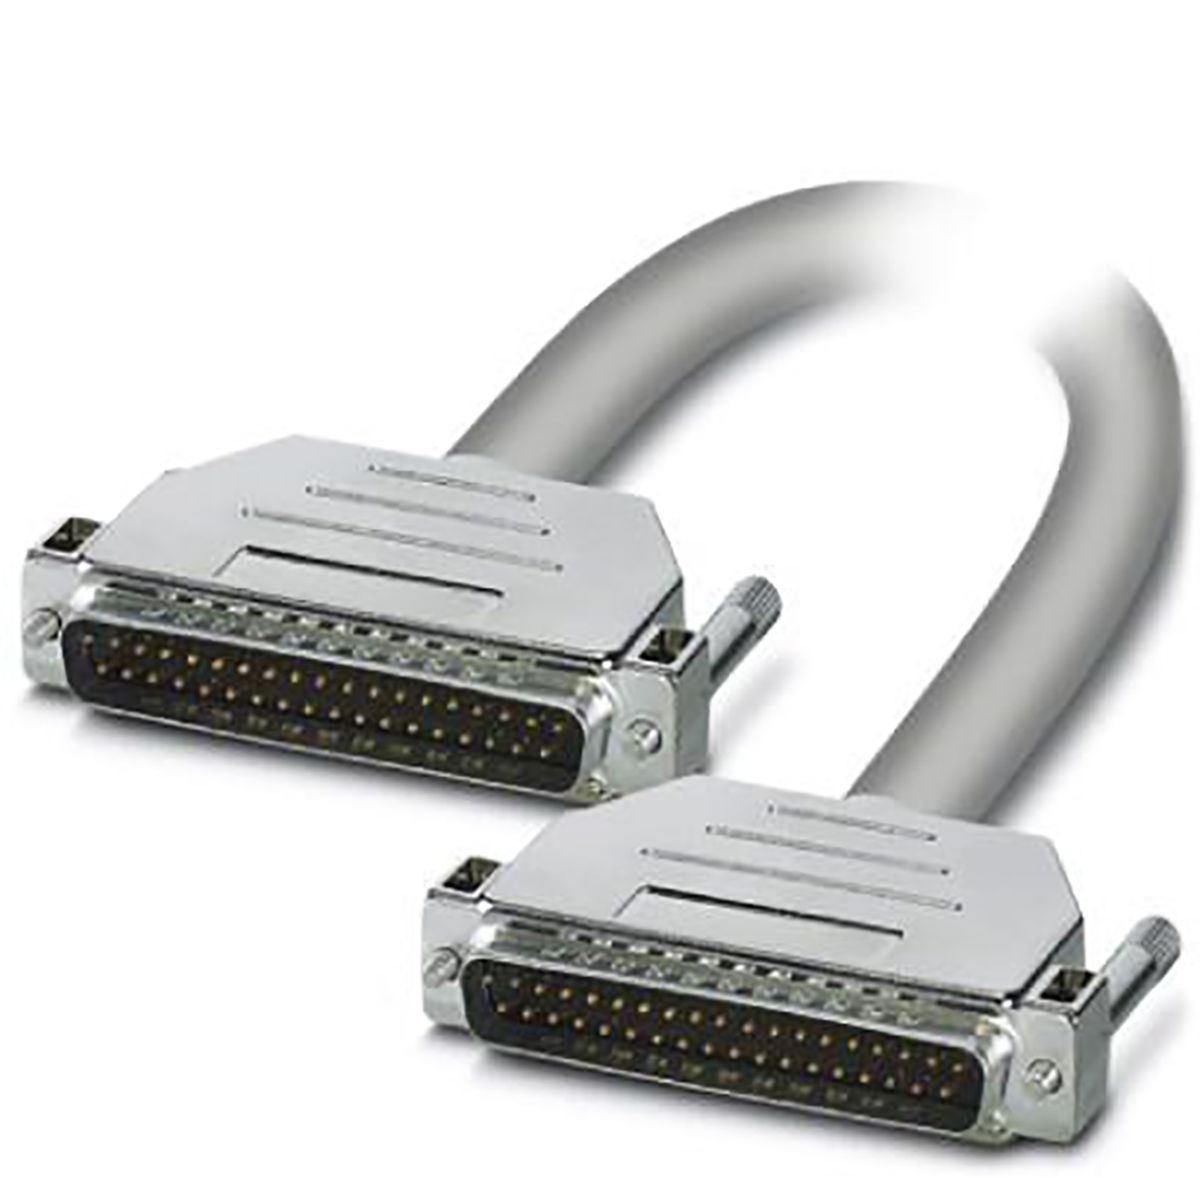 Phoenix Contact 2m 37 pin D-sub to 37 pin D-sub Serial Cable